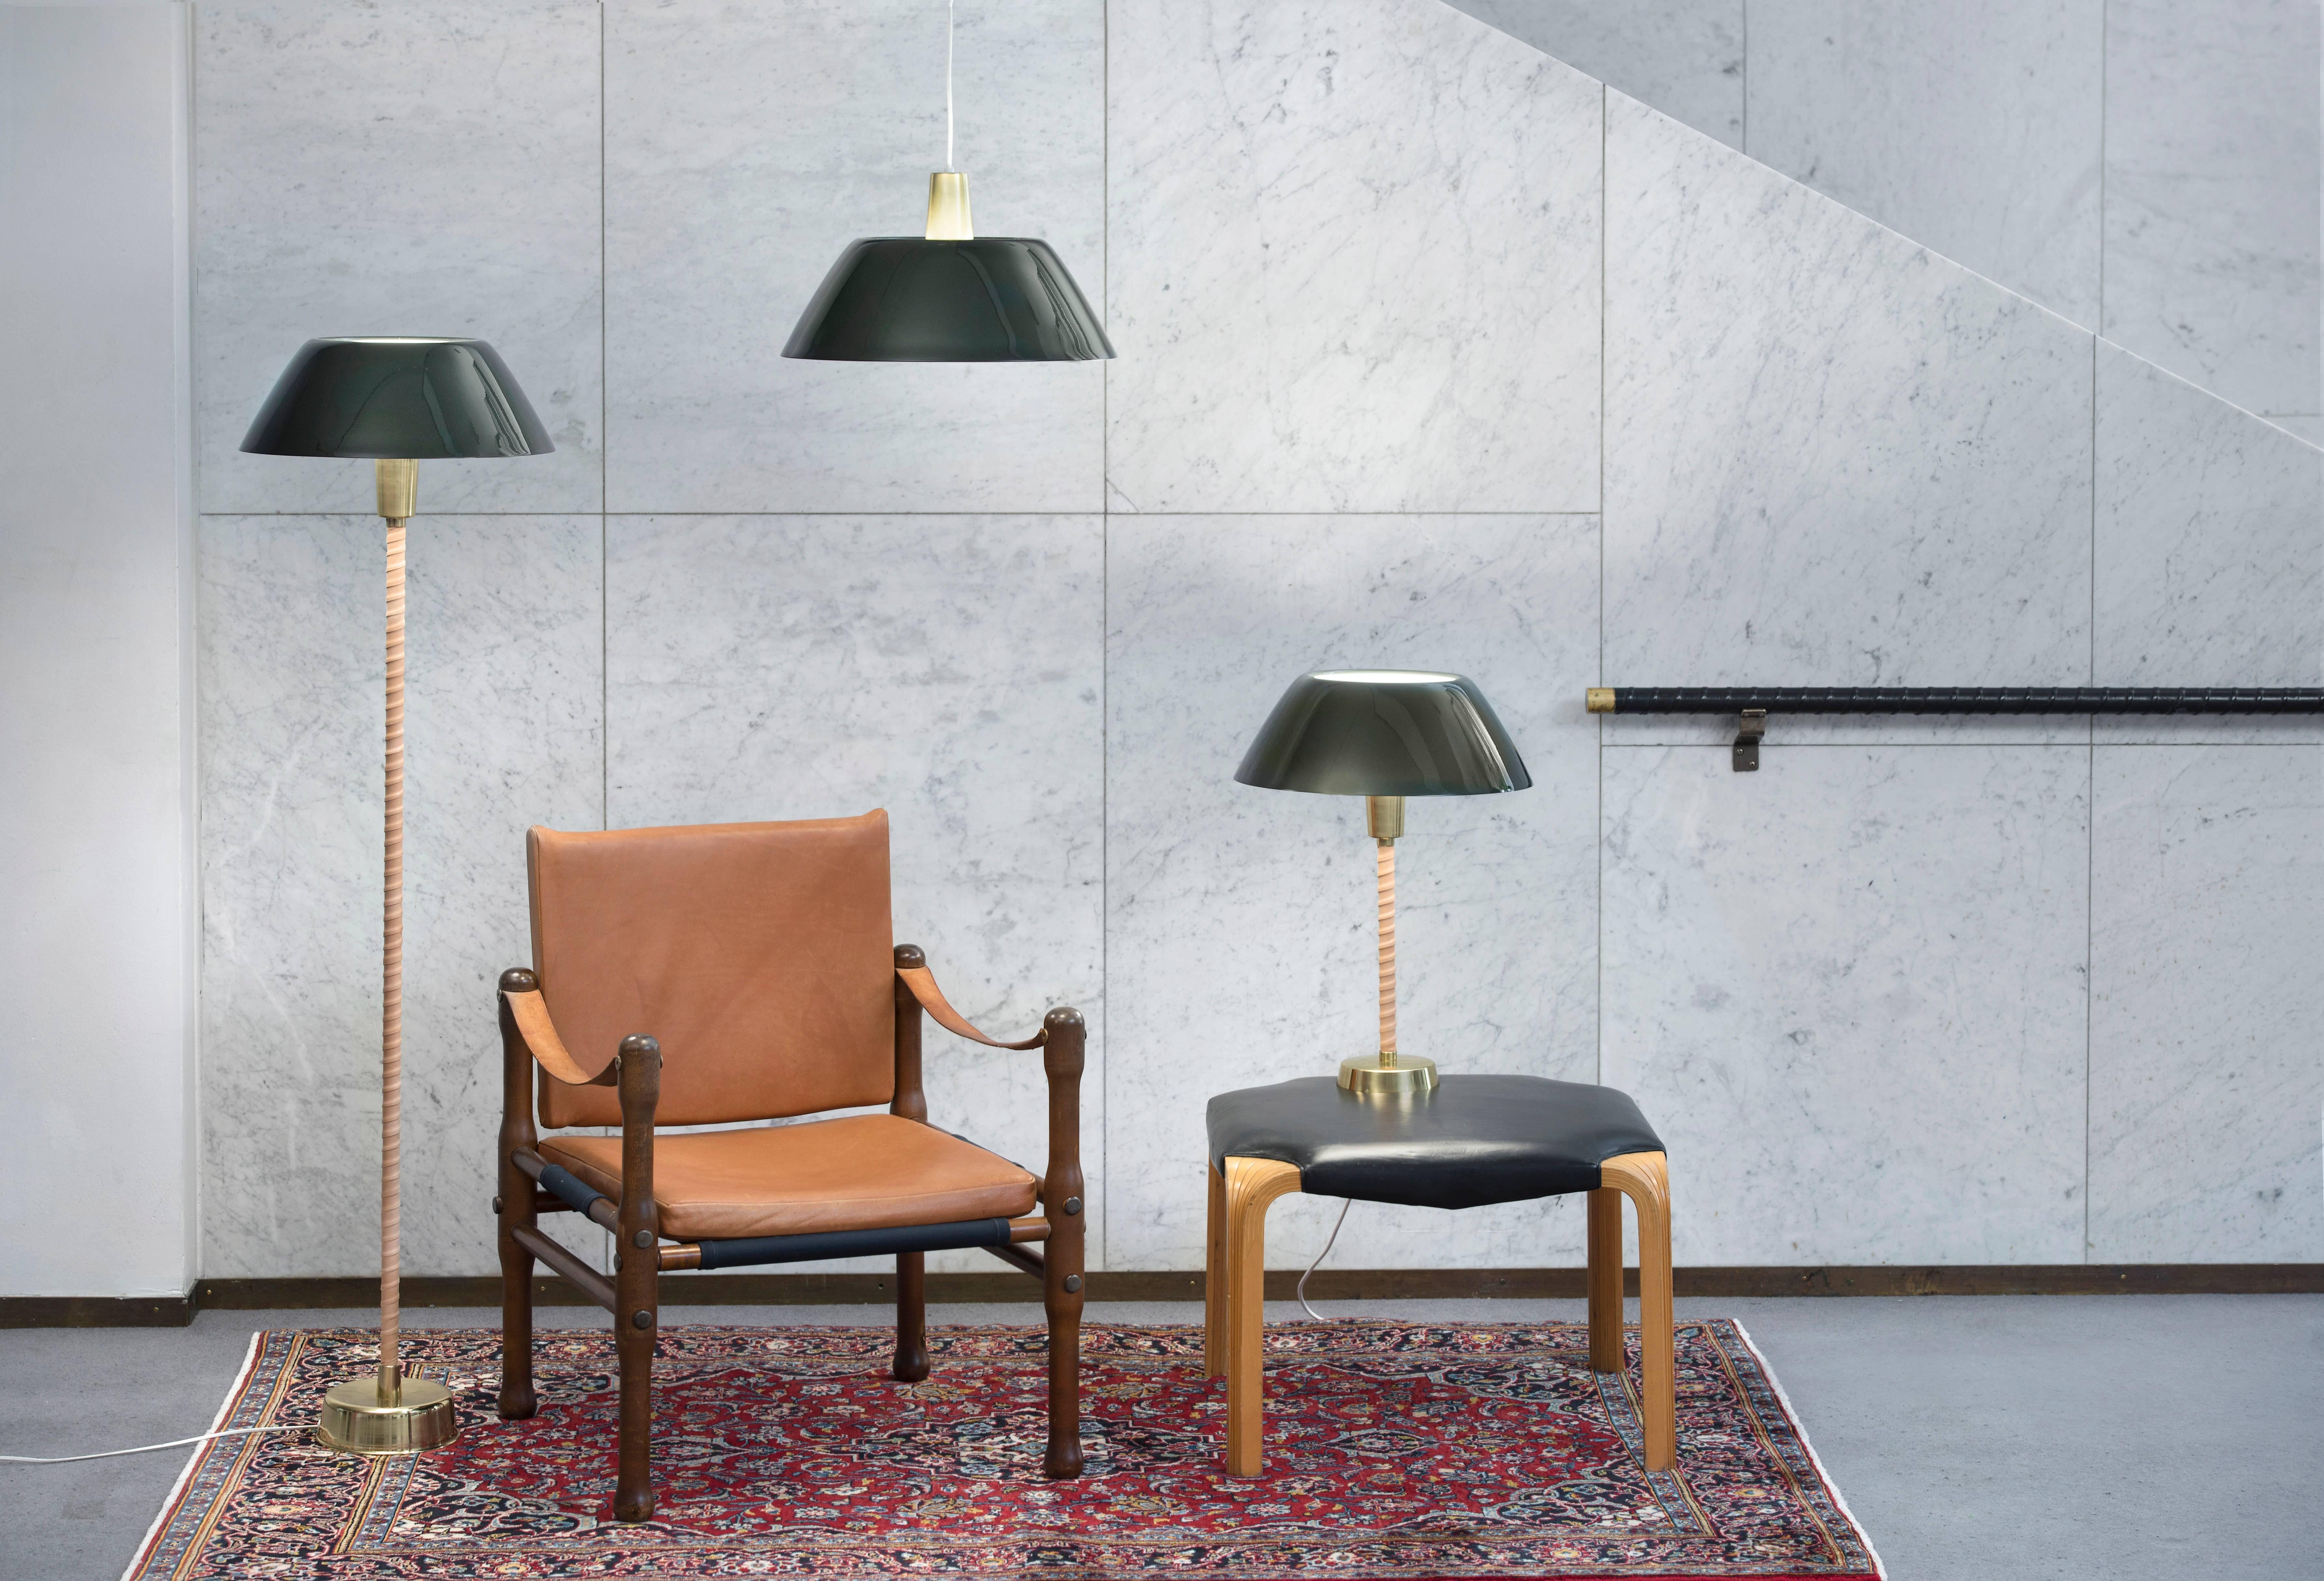 Lisa Johansson-Pape 'Senator' table lamp for Innolux Oy. An iconic pendant lamp designed by the Finnish master and executed in brass and ultra dark green painted aluminum shade. An authorized re-edition made to exacting standards using the highest